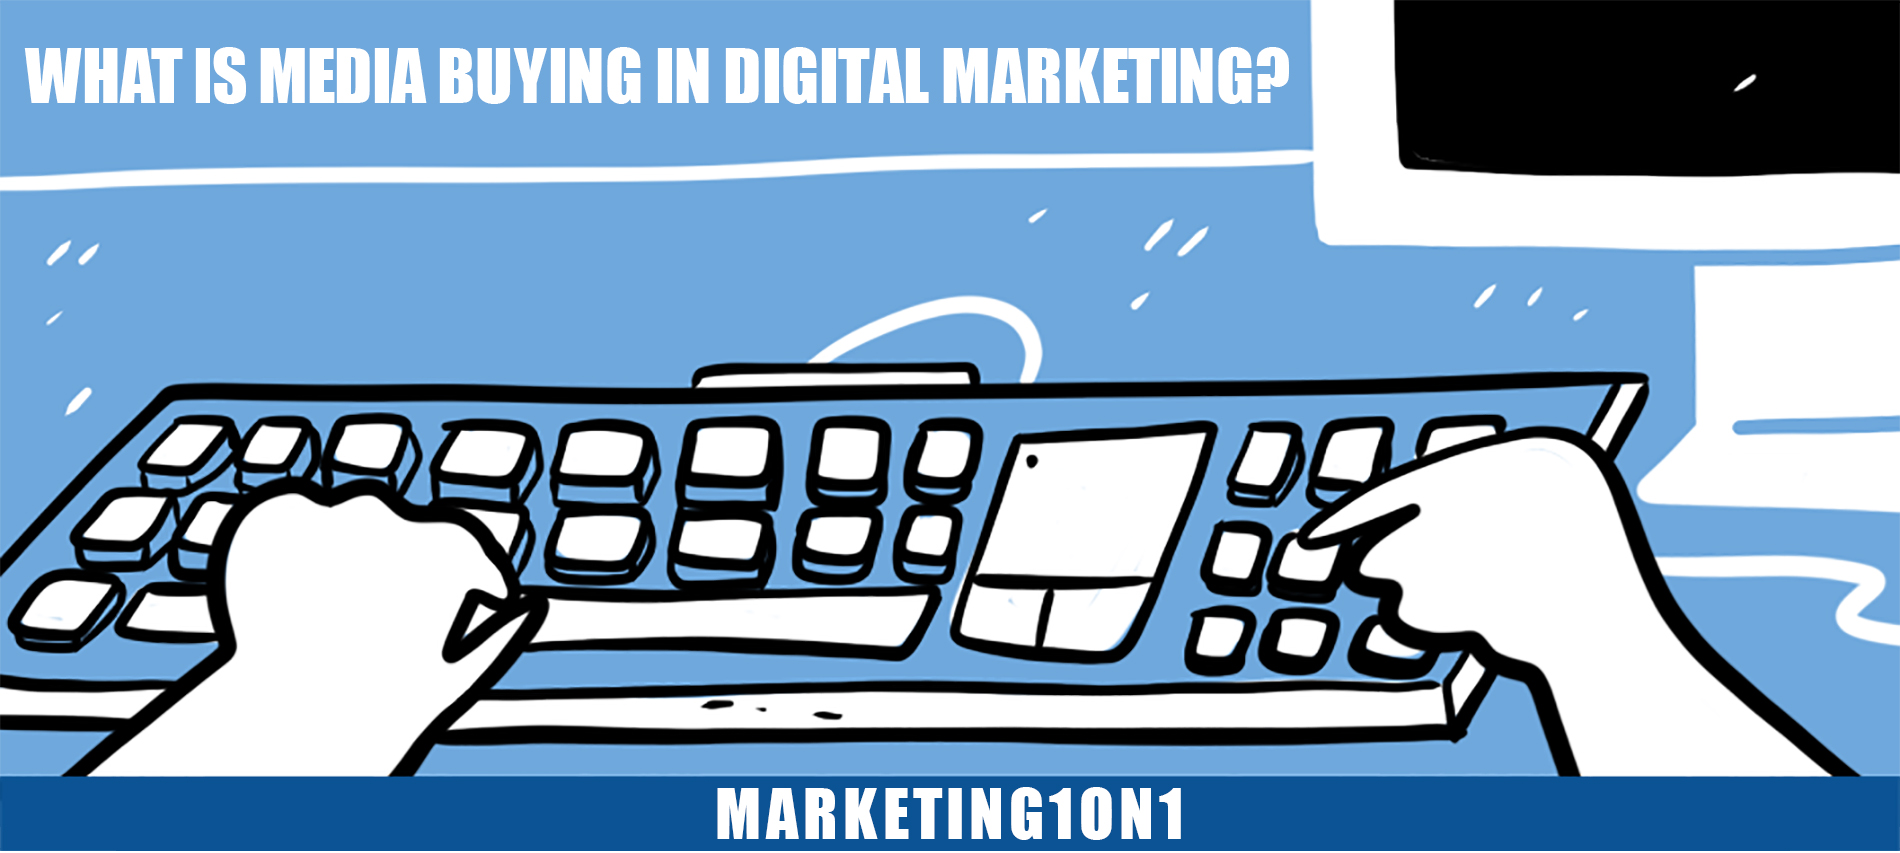 What is media buying in digital marketing?